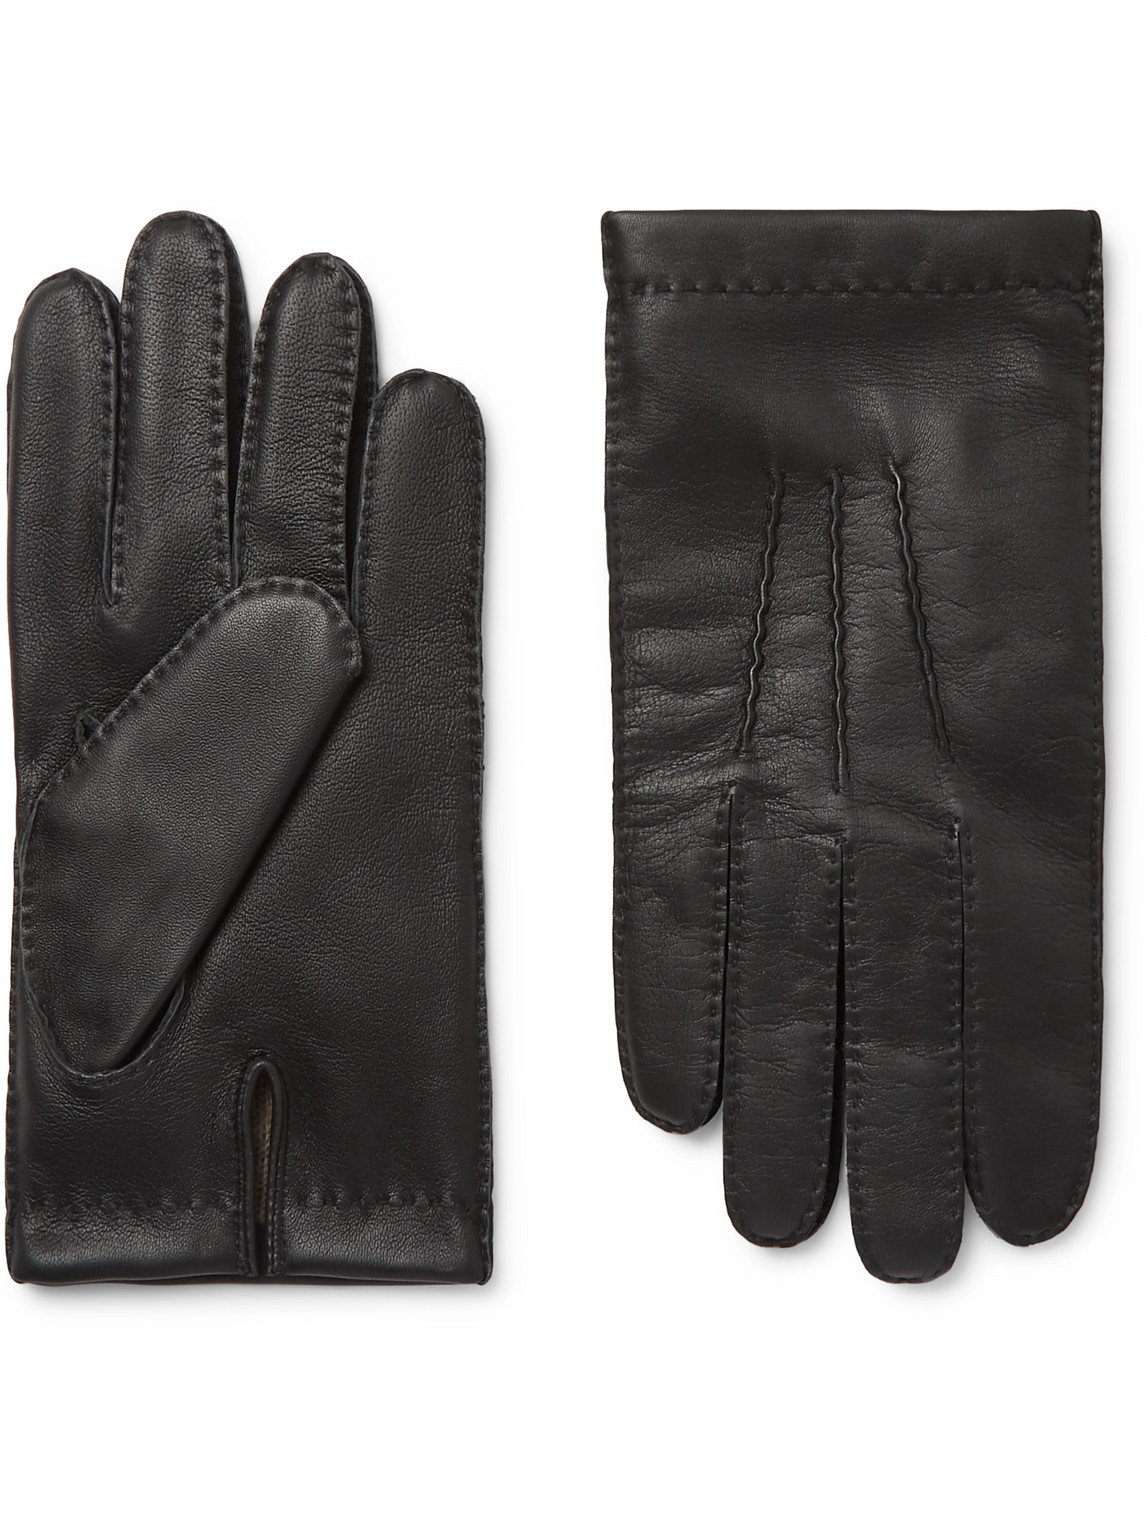 Shaftesbury Touchscreen Cashmere-Lined Leather Gloves